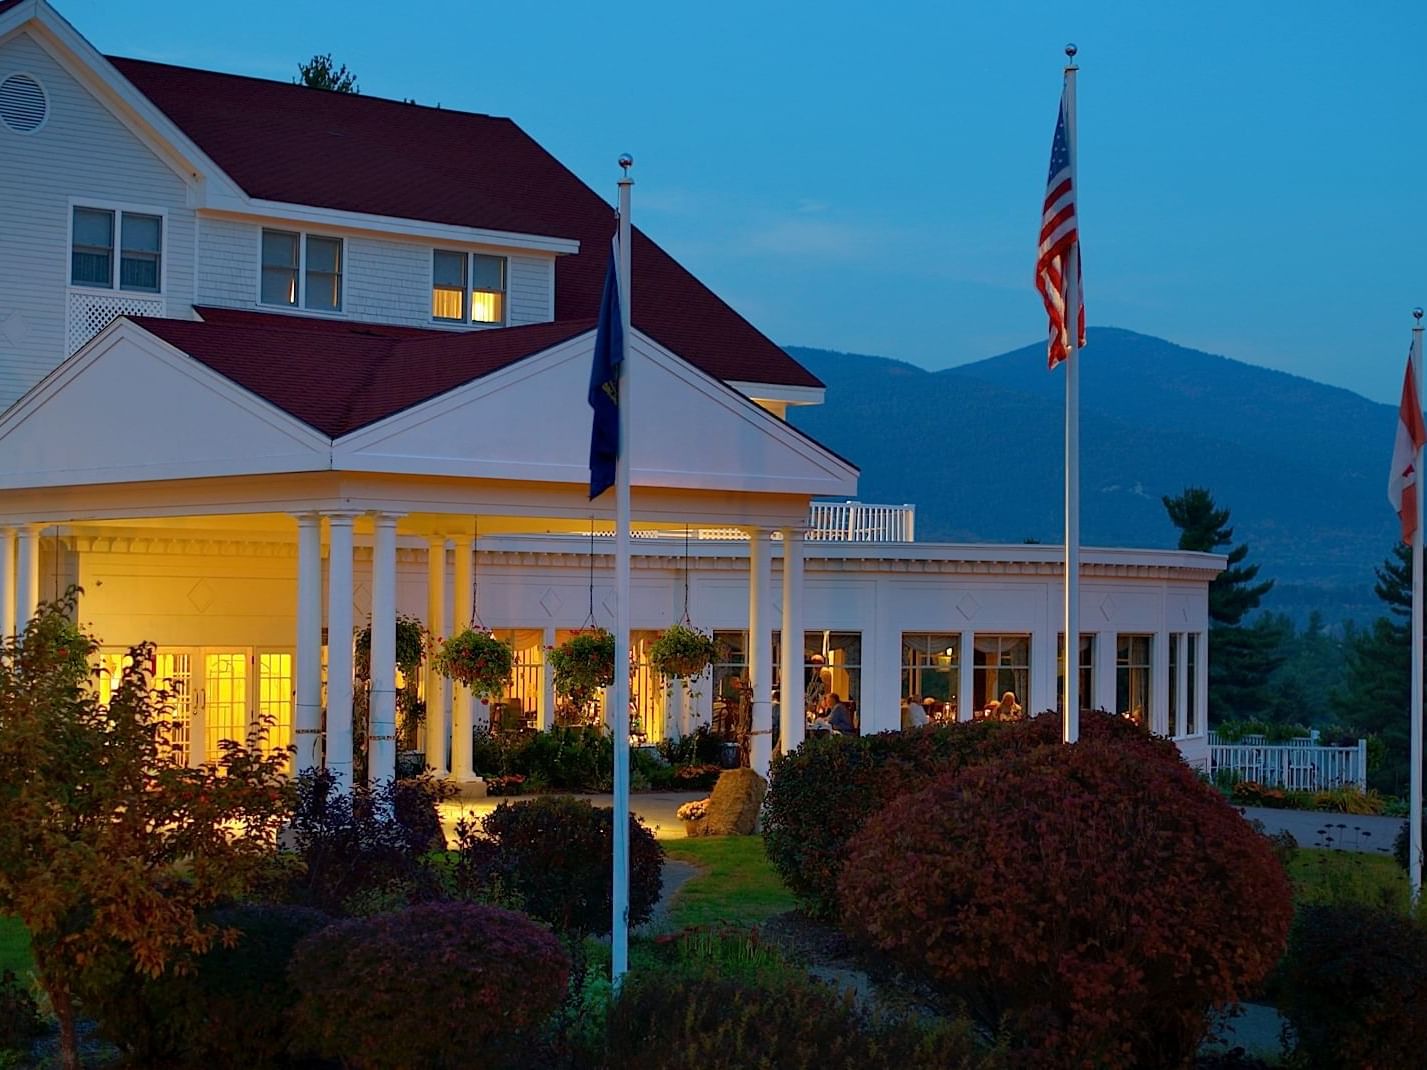 Exterior night view of the White Mountain Hotel & Resort